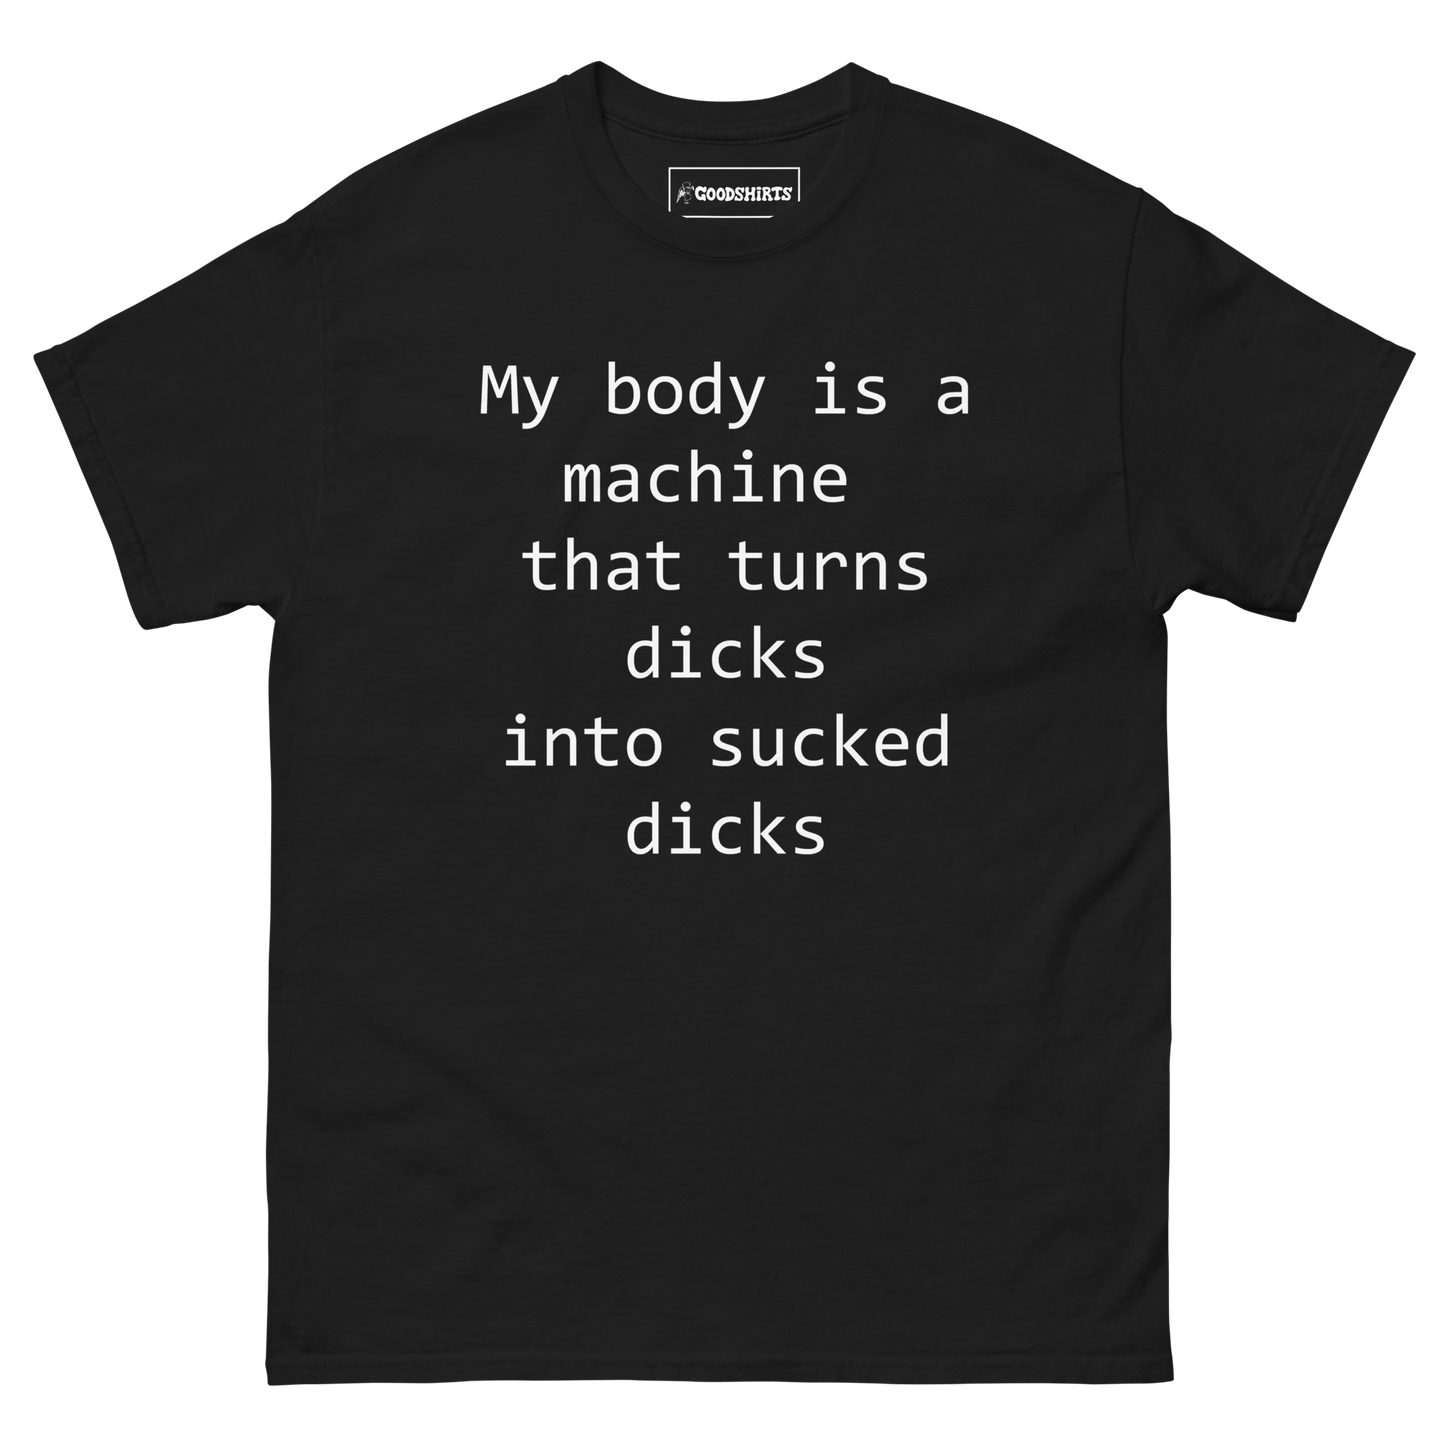 My body is a machine that turns dicks into sucked dicks.